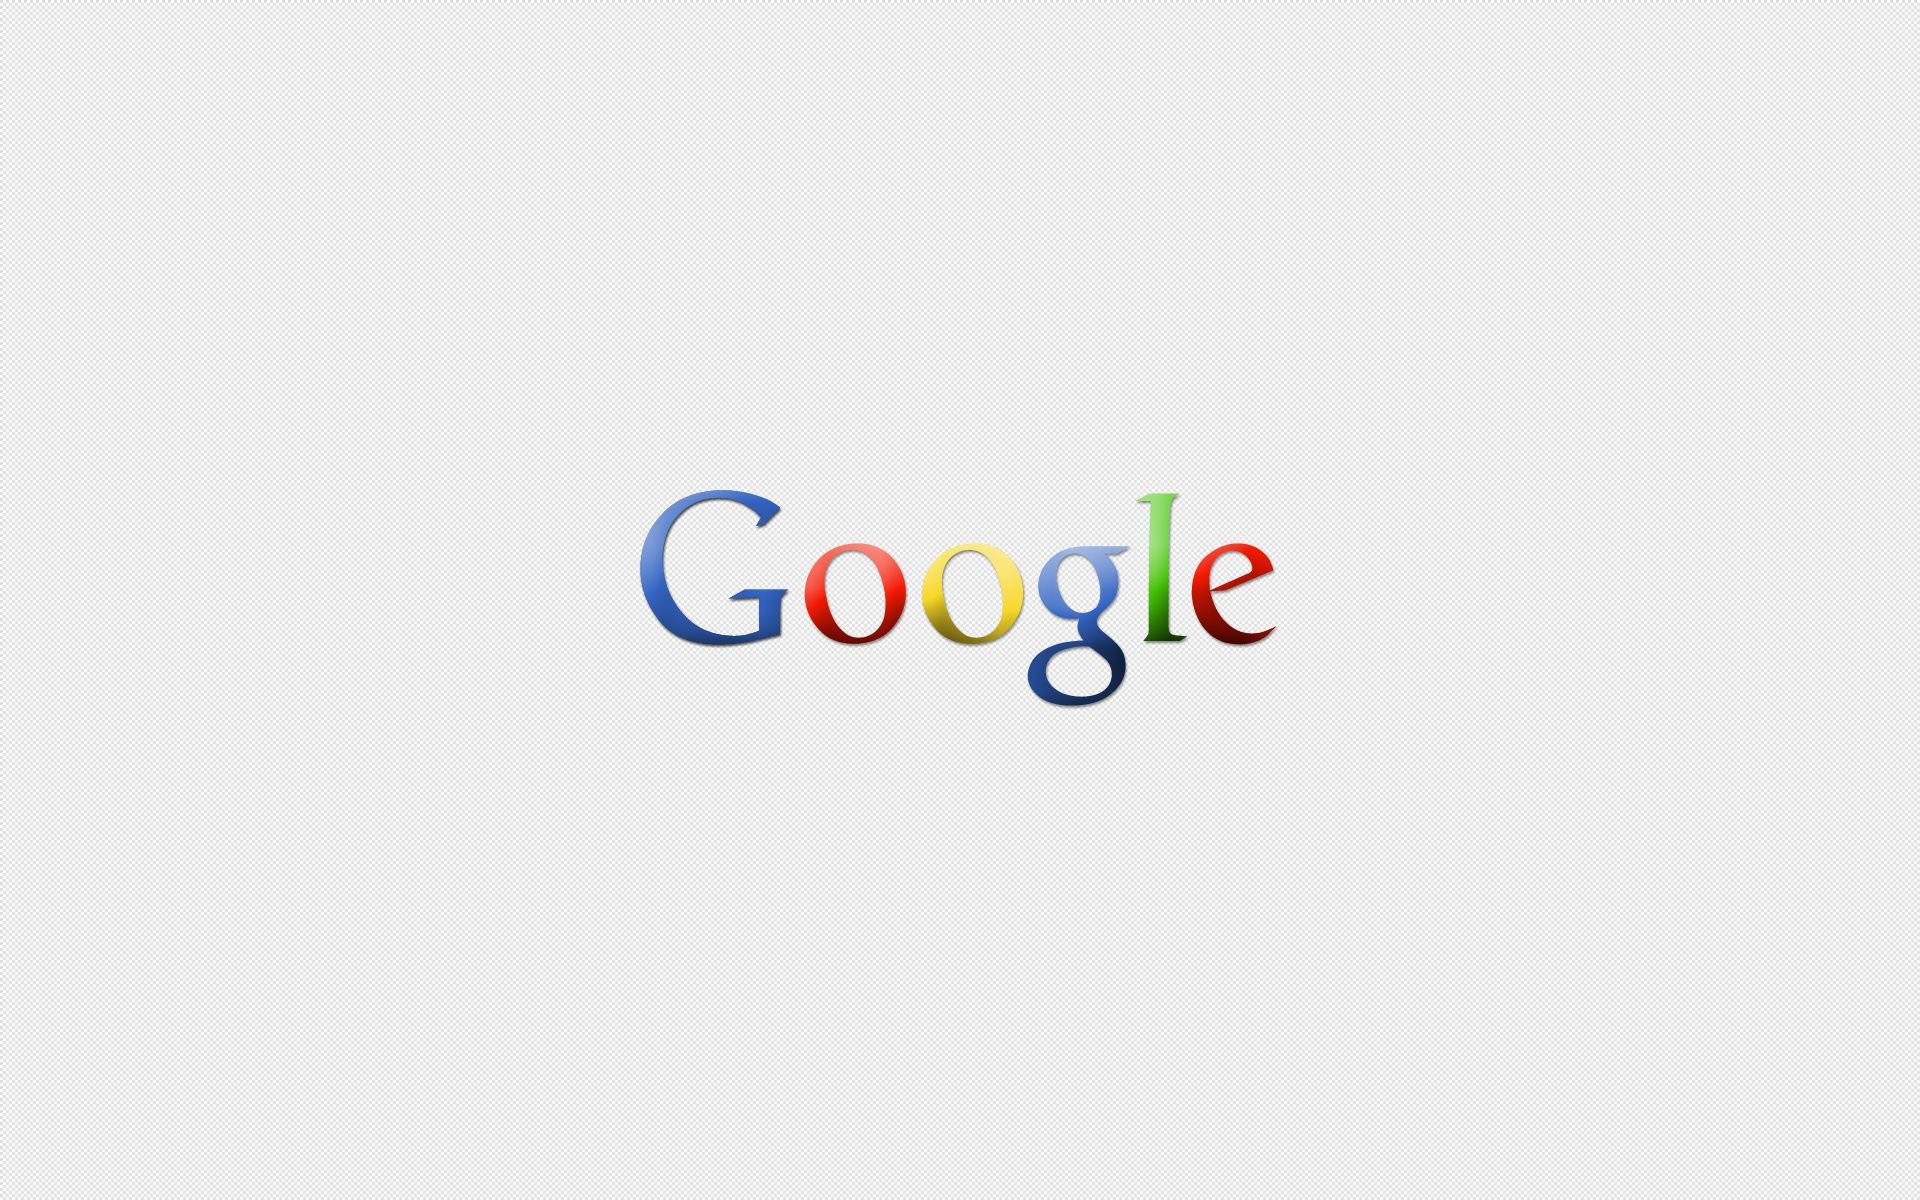 Google search wallpapers and images - wallpapers, pictures, photos